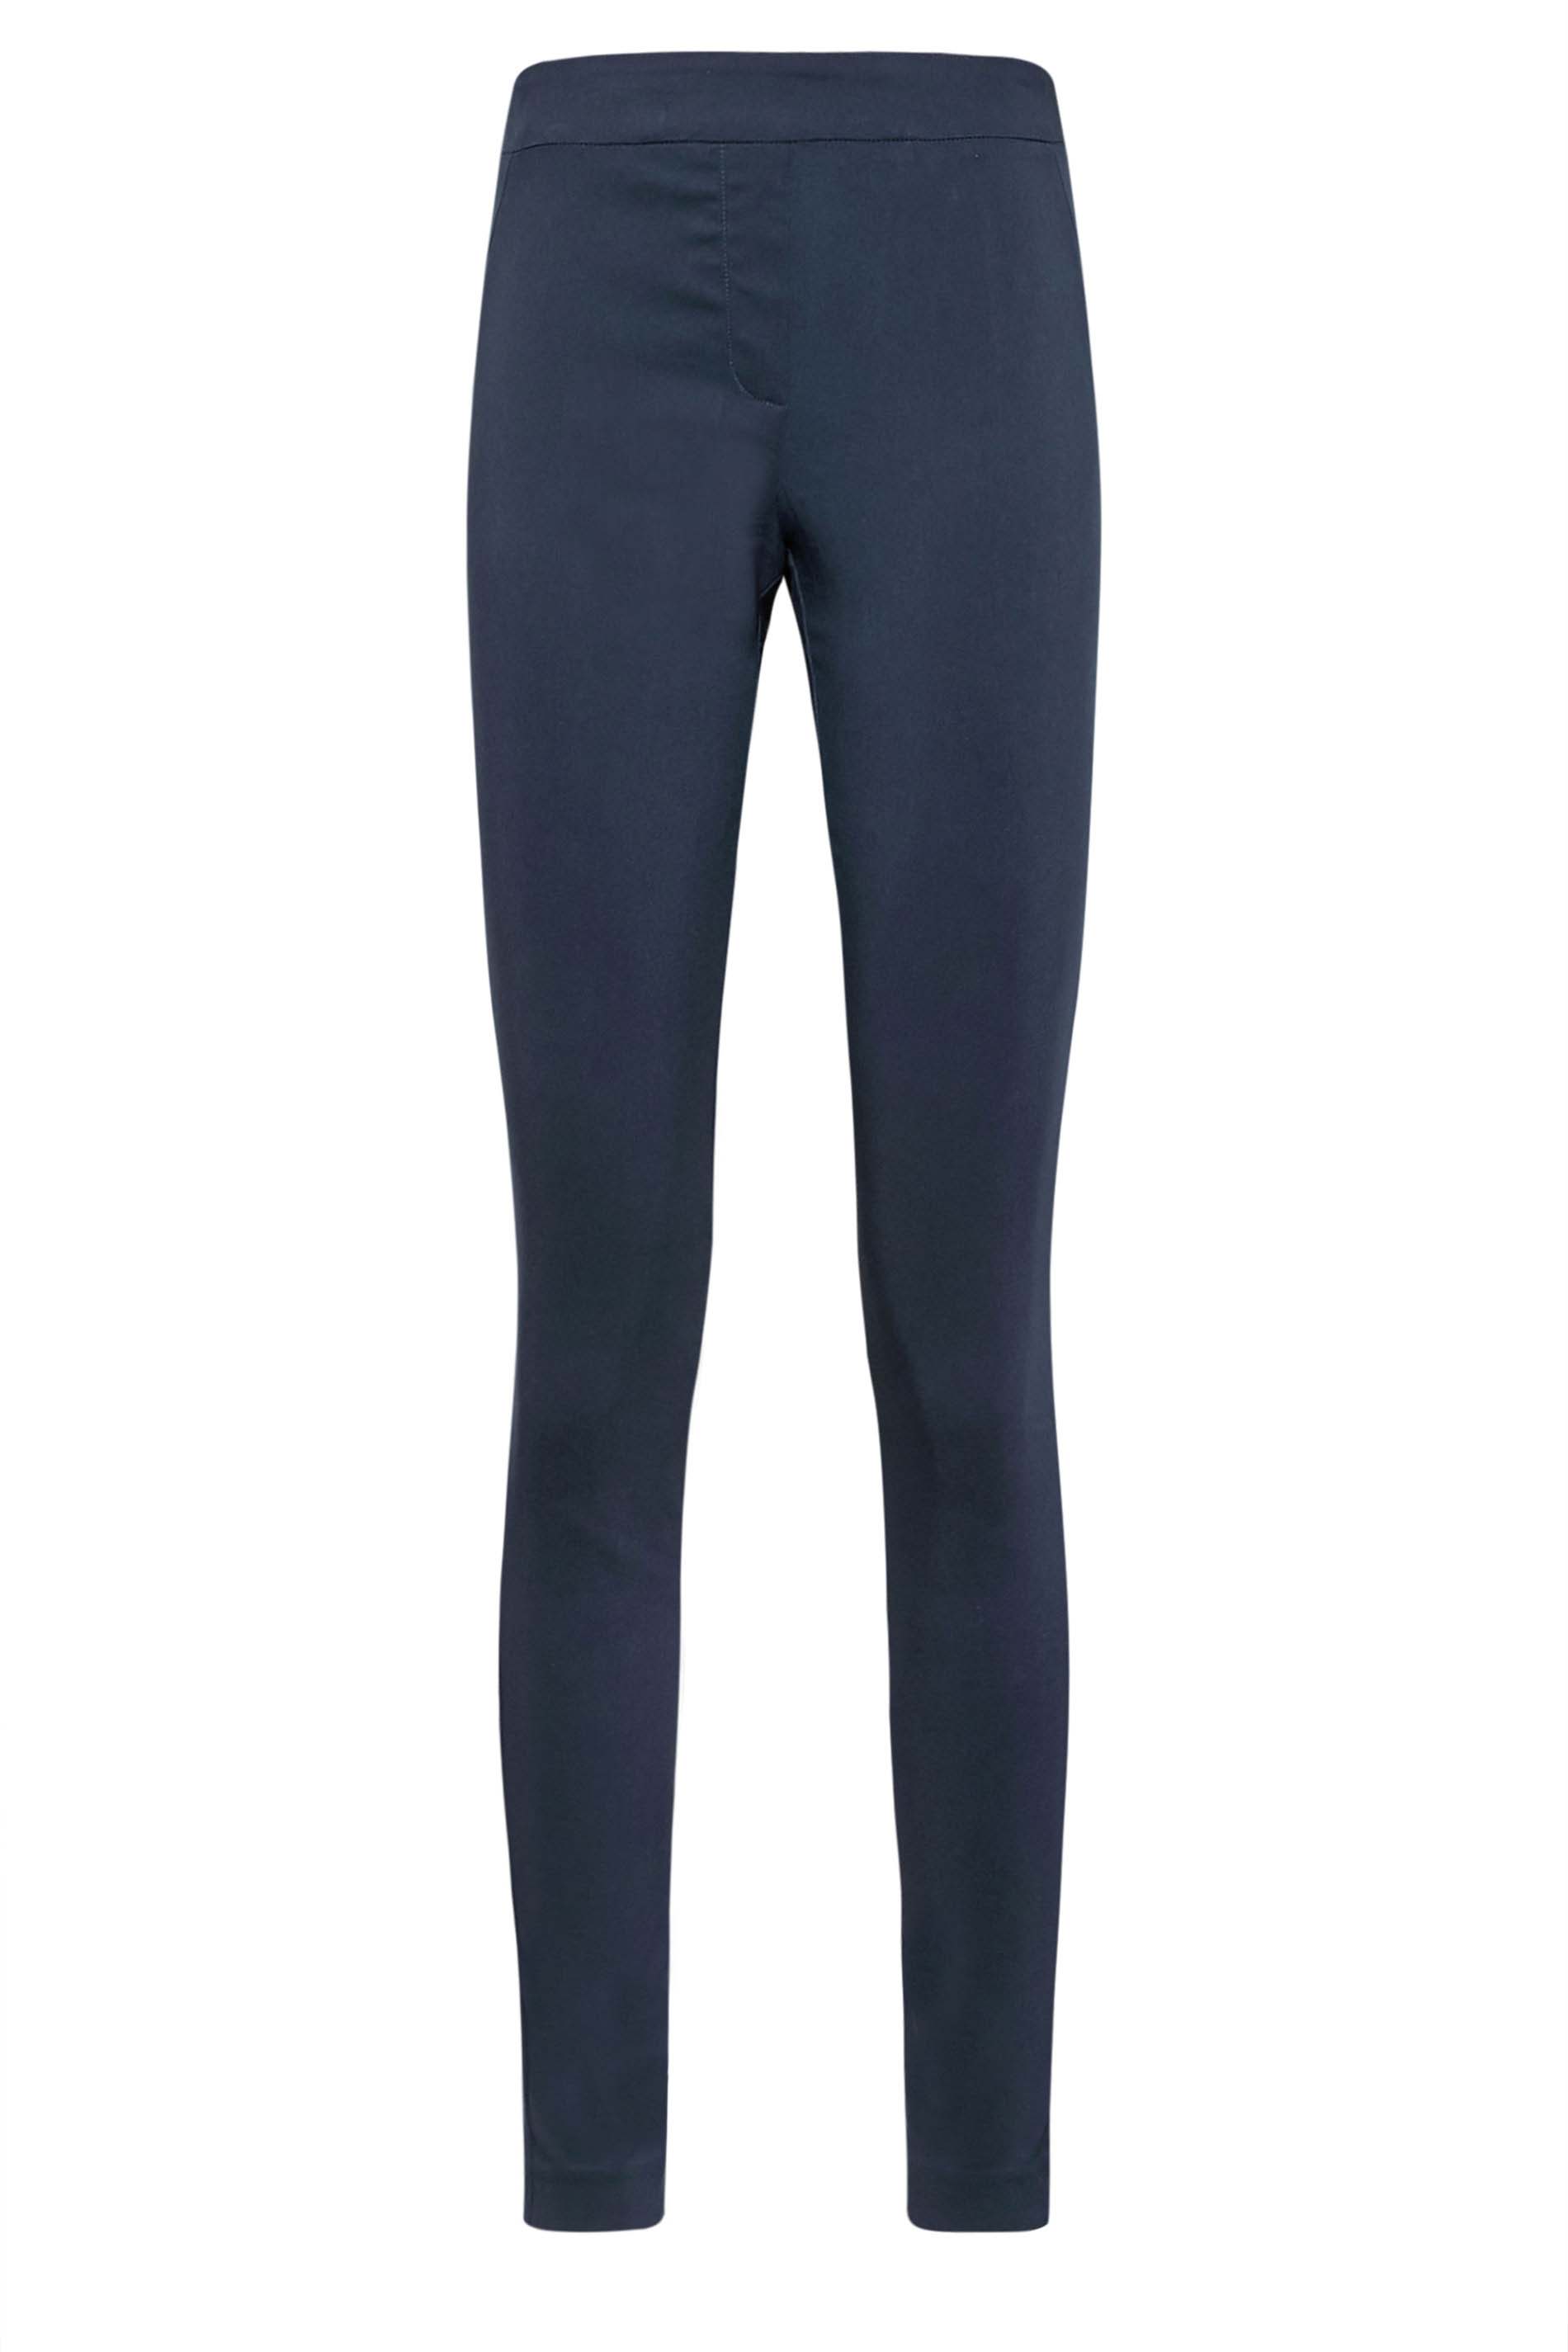 LTS Tall Women's Cobalt Blue Tapered Trousers